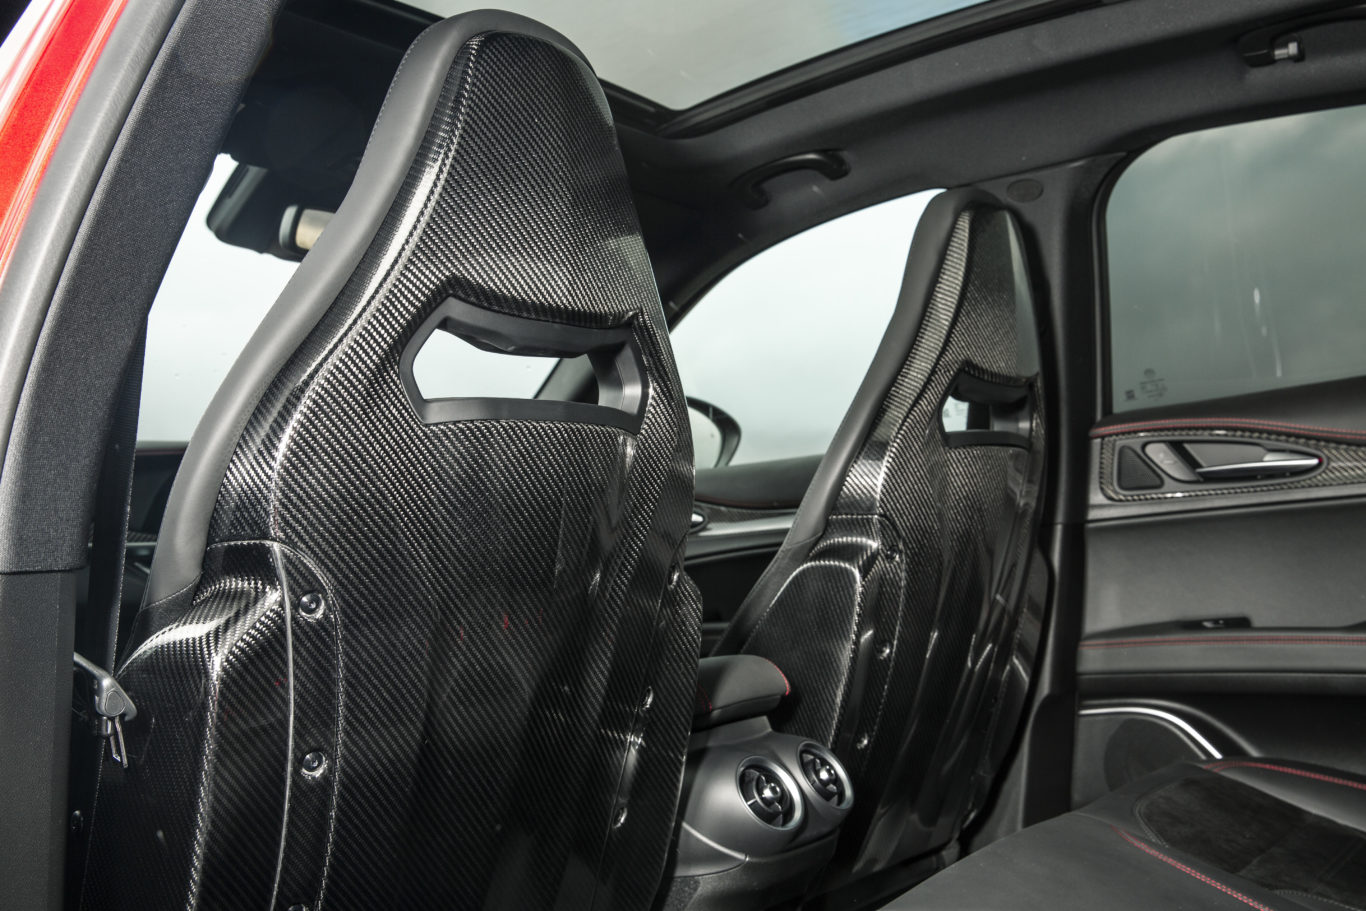 Carbon-shell seats look great and are comfortable